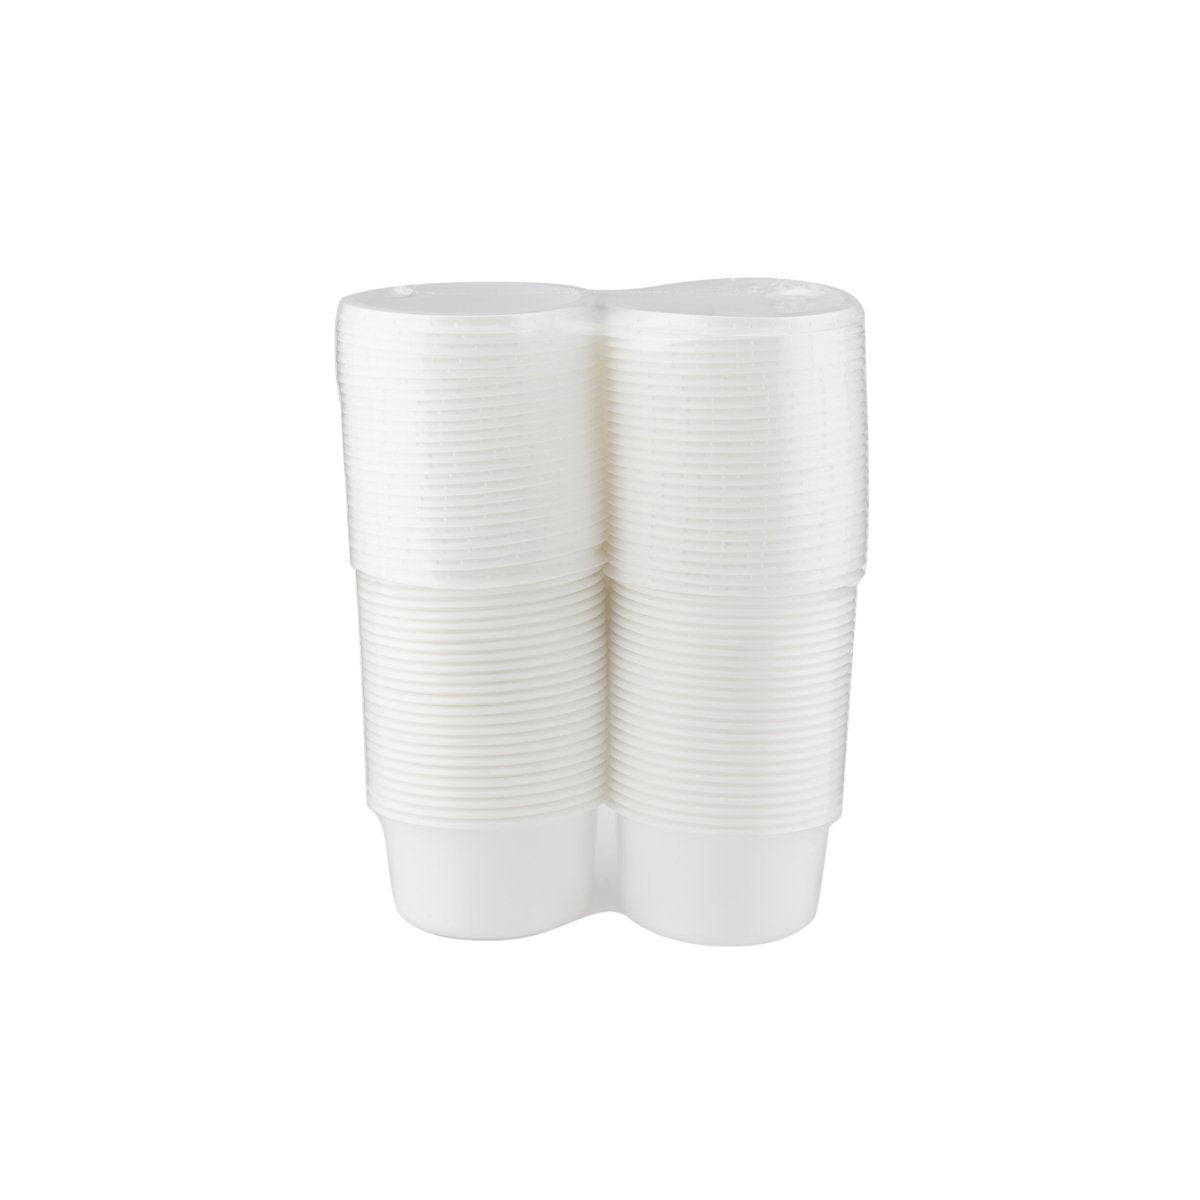 Twin Pack Plastic Bowl With Lid - hotpackwebstore.com - White Bowls